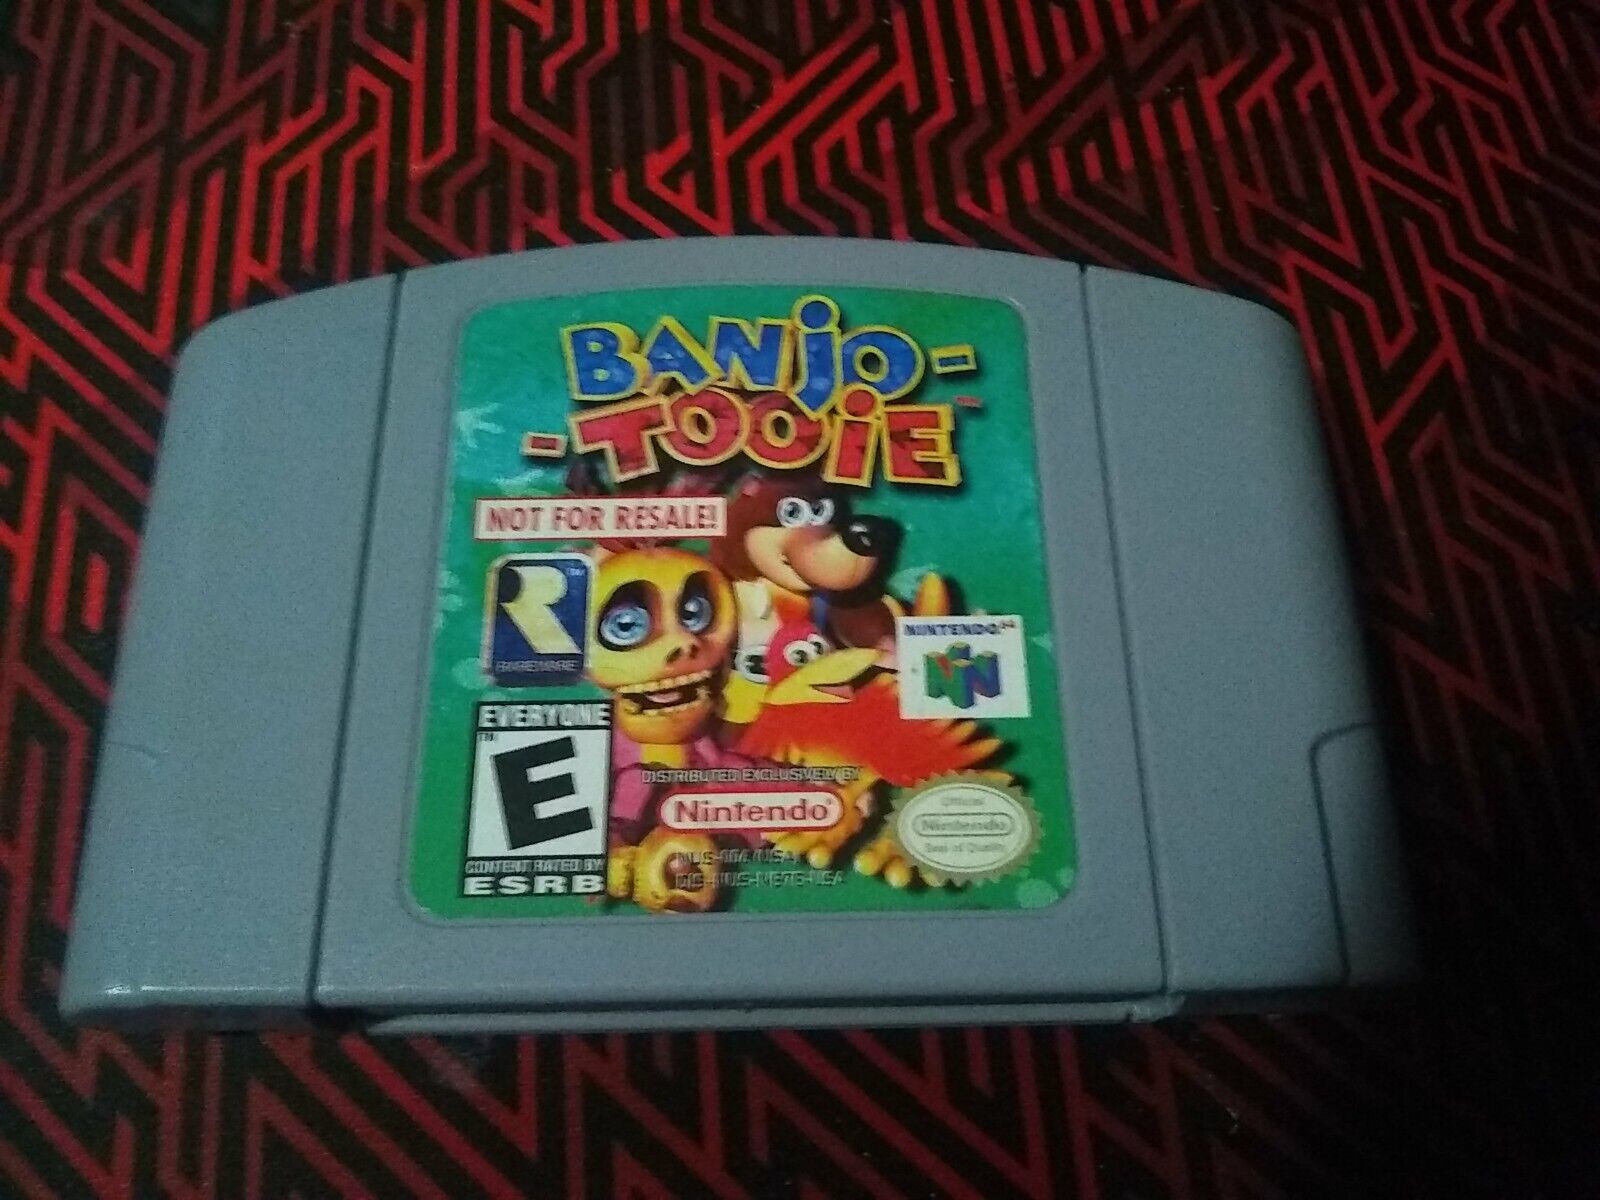 Banjo Tooie Nintendo 64 NOT FOR RESALE NFR N64 Cartridge Only. Authentic+Tested